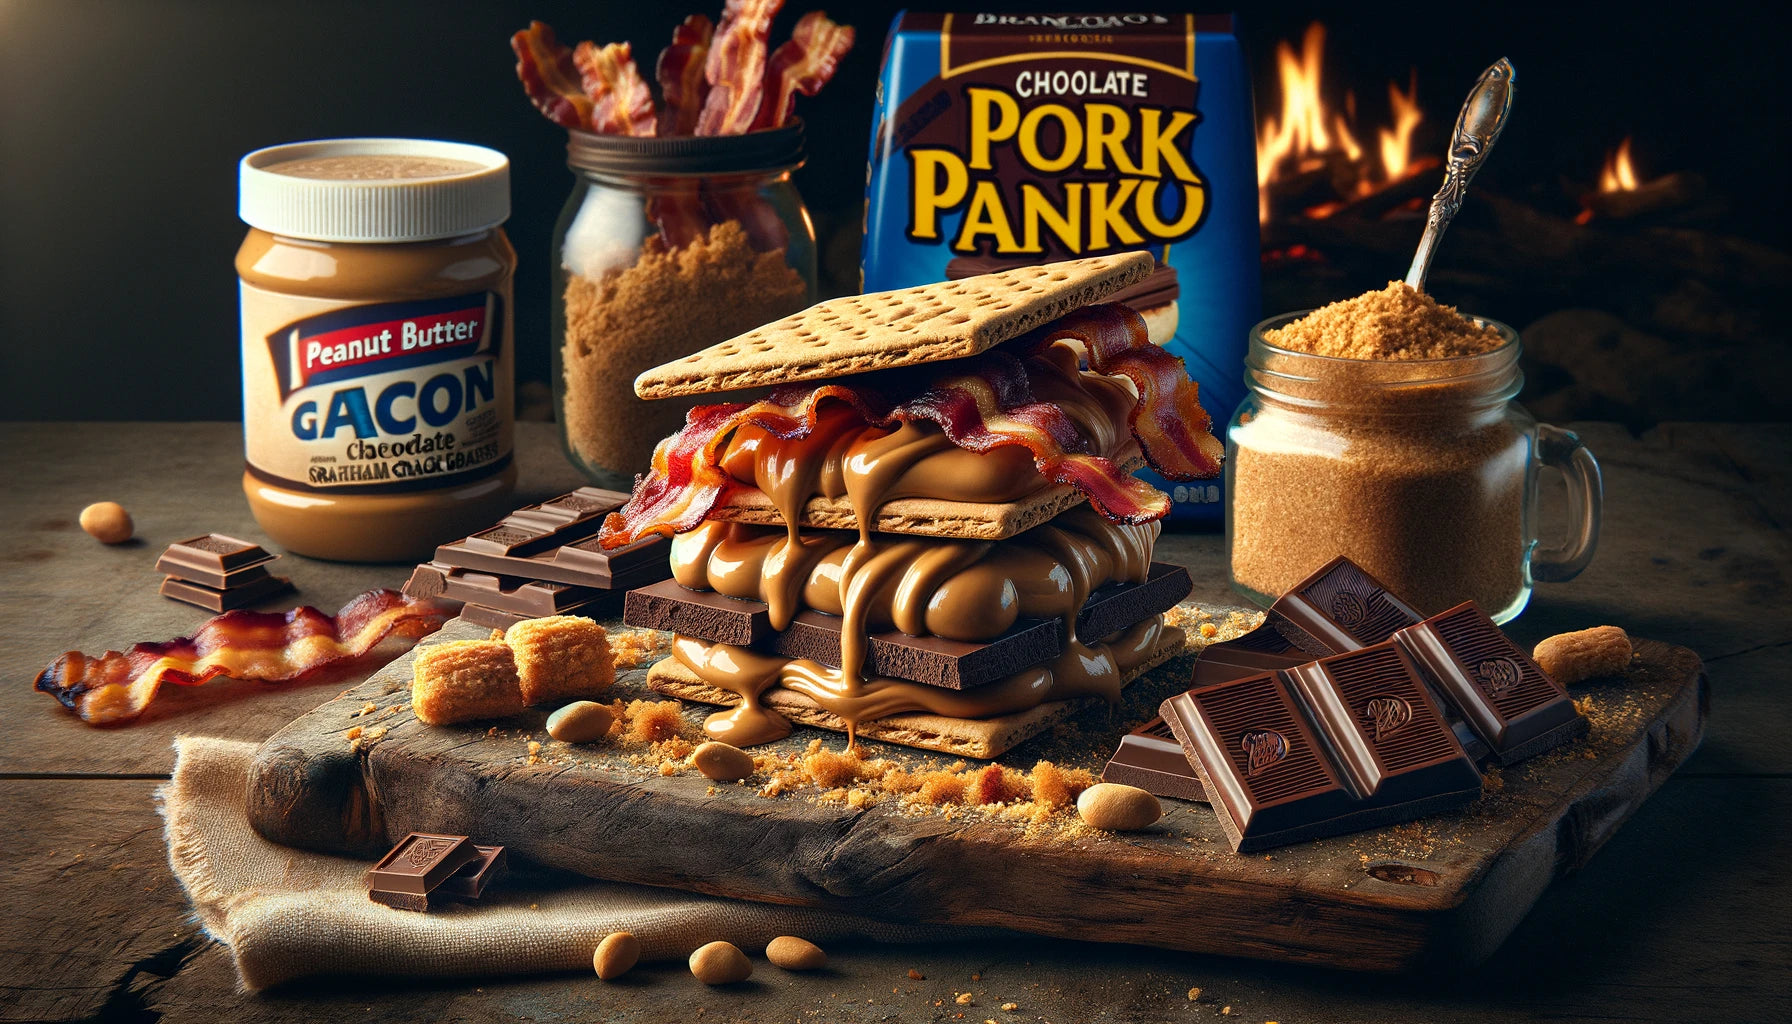 Peanut Butter Bacon Chocolate Graham Cracker S’mores with Pork Panko